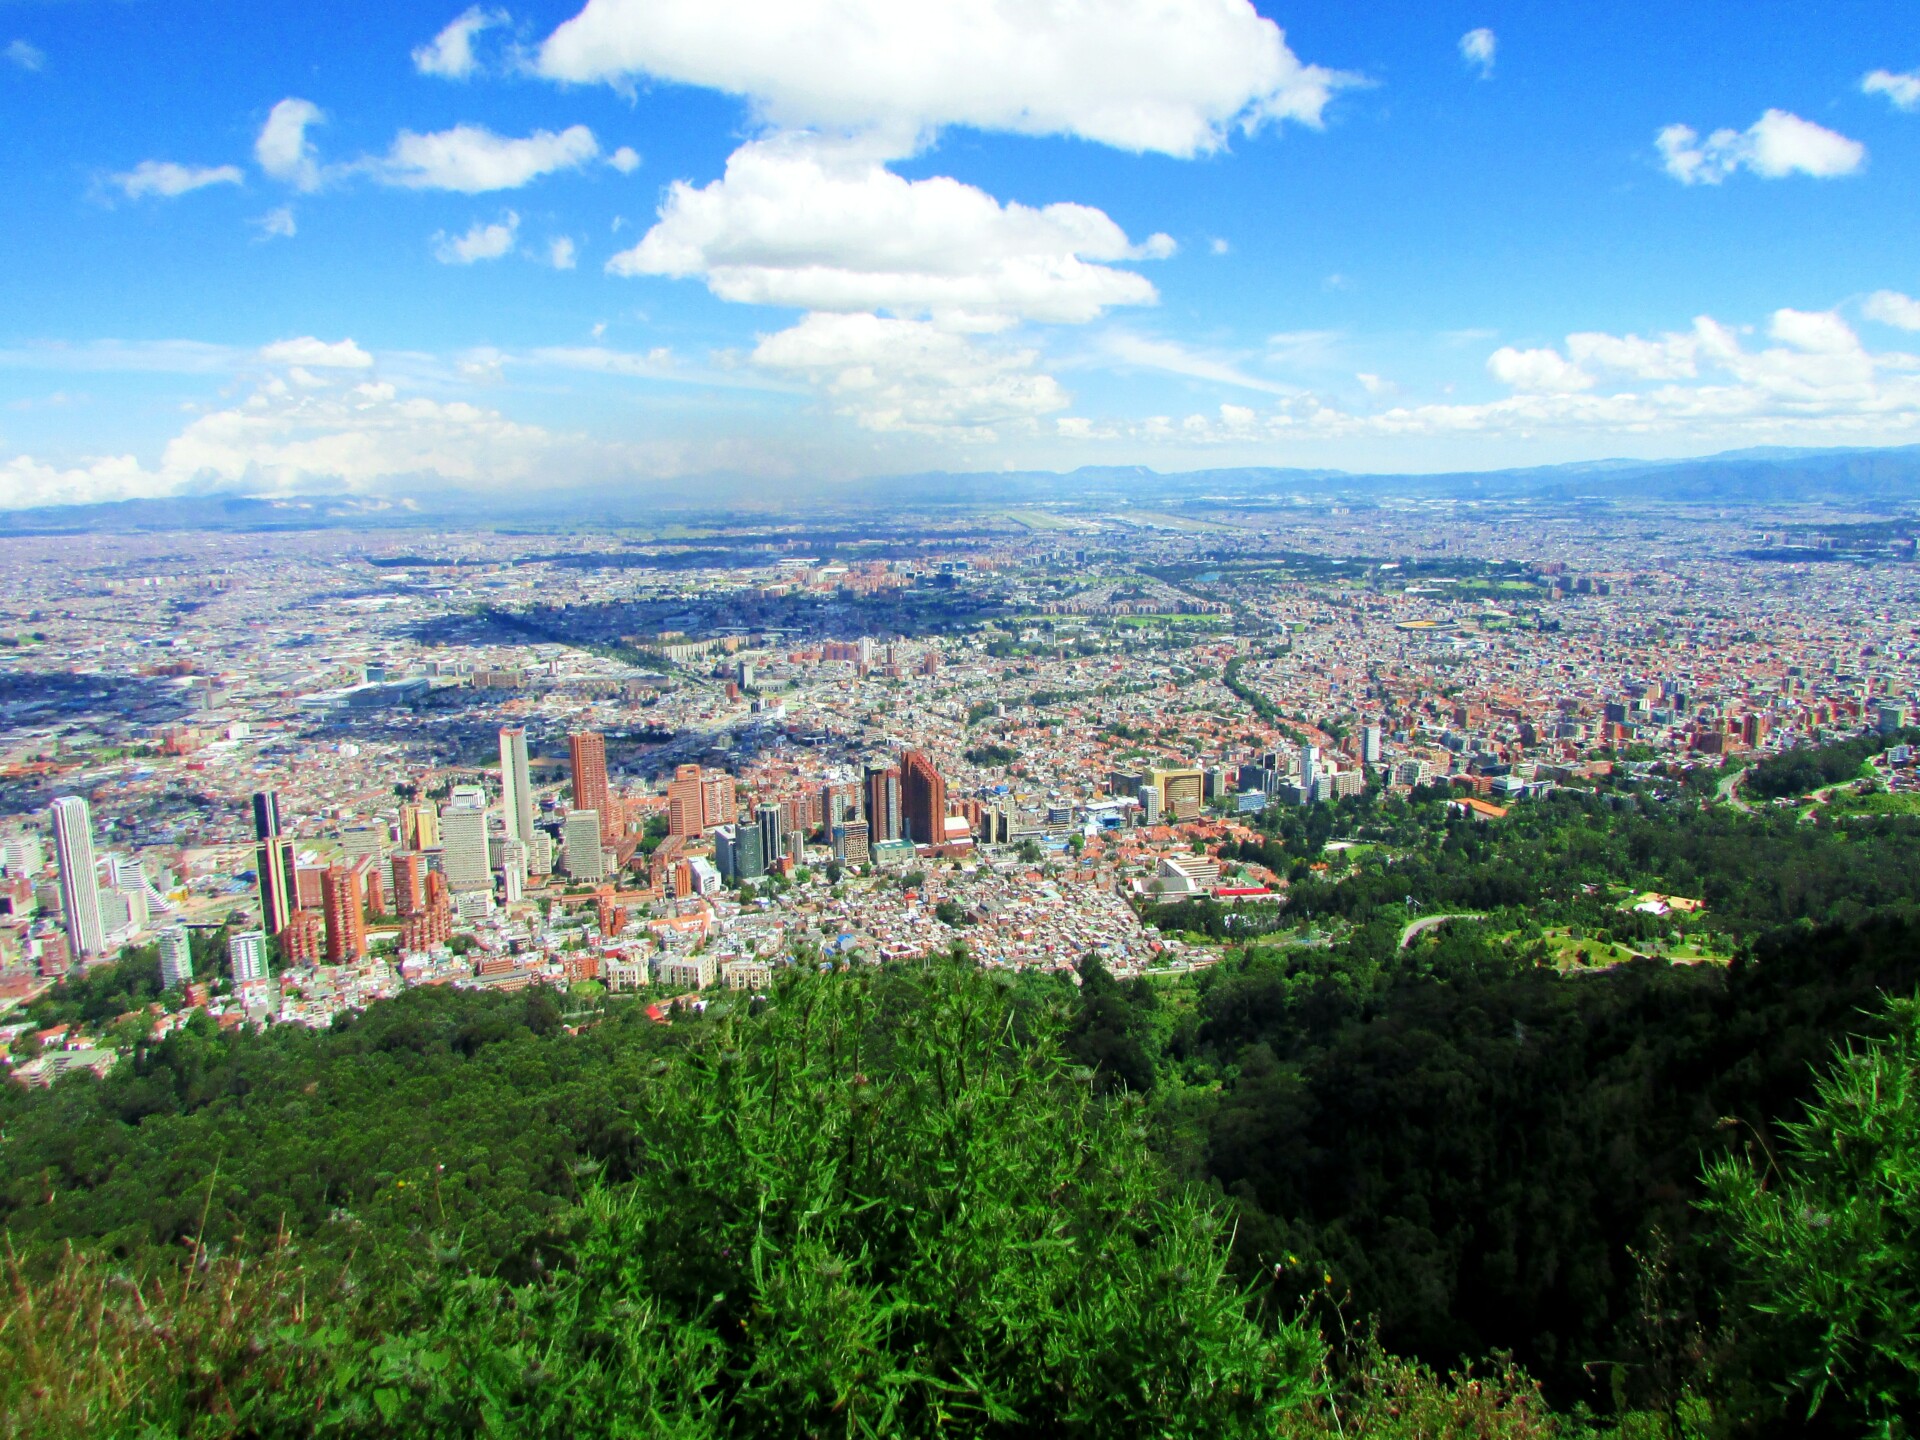 A view of Bogotà, Colombia from Monserrate